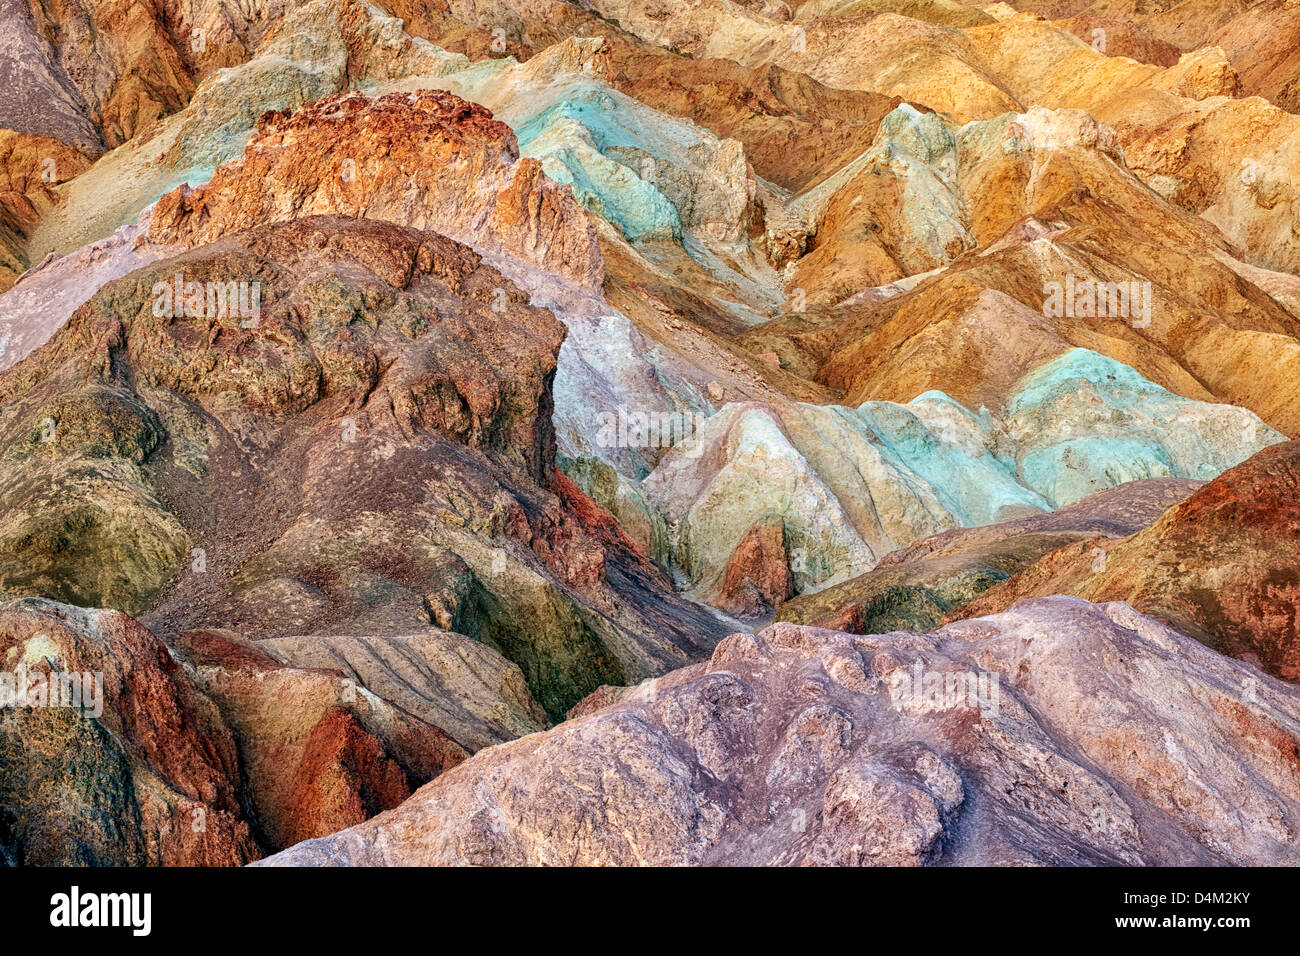 The oxidation of many metals created the Artist Palette in California's Death Valley National Park. Stock Photo